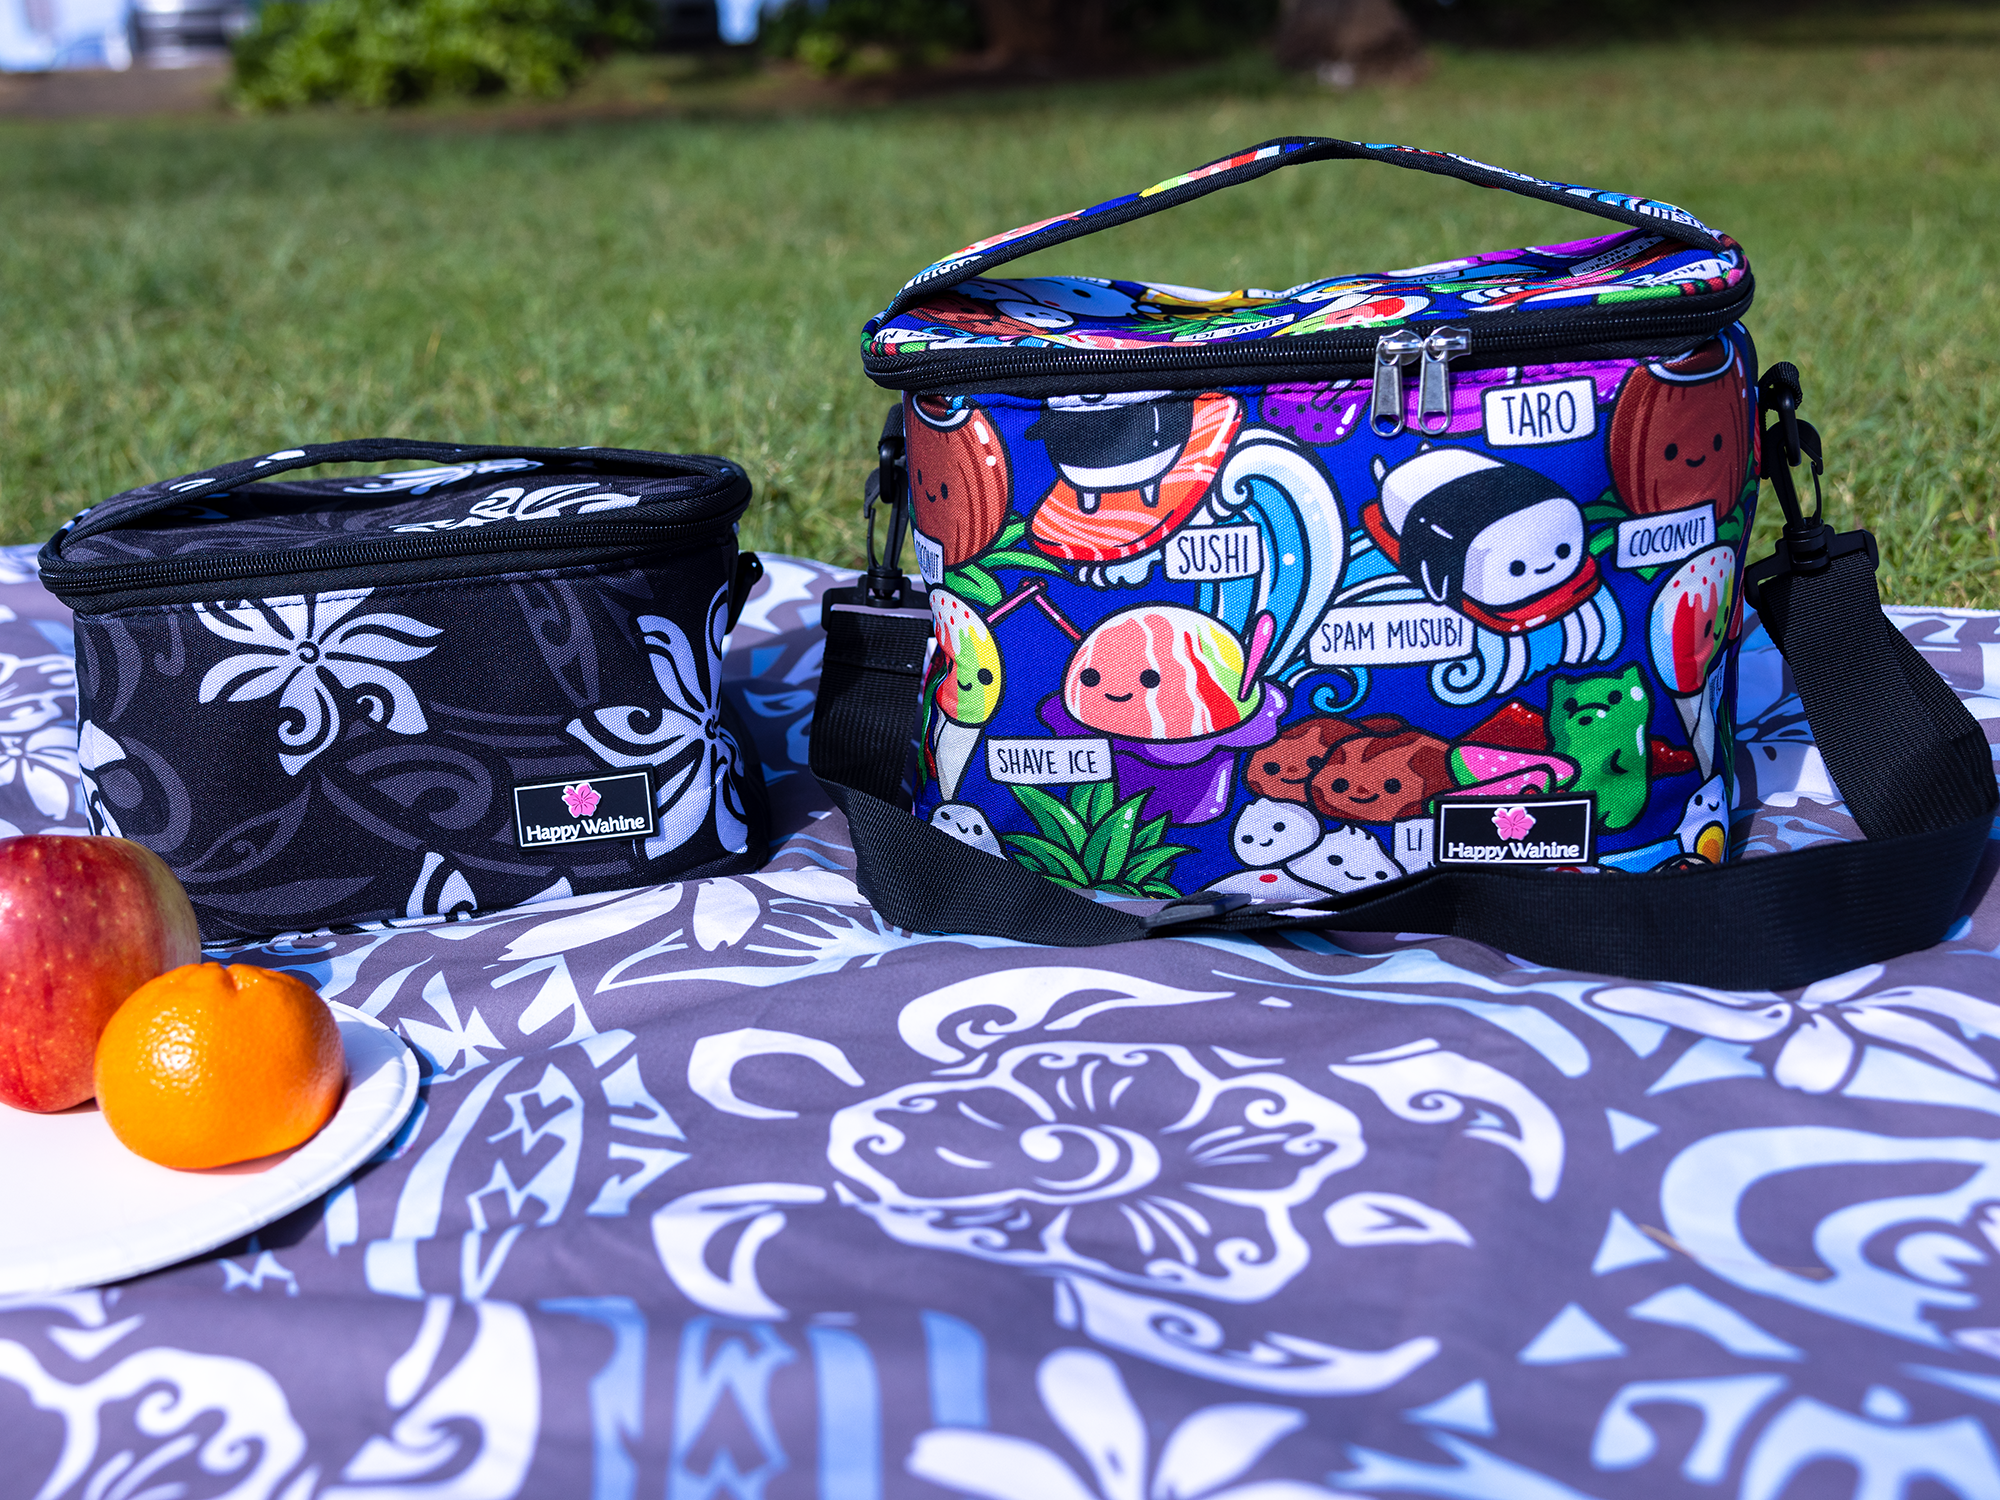  Moana Pua Pig and HeiHei Chicken Insulated Lunch Box Leakproof  Cooler Tote Bag Reusable Portable Lunch Bag for Travel Work Picnic : Home &  Kitchen